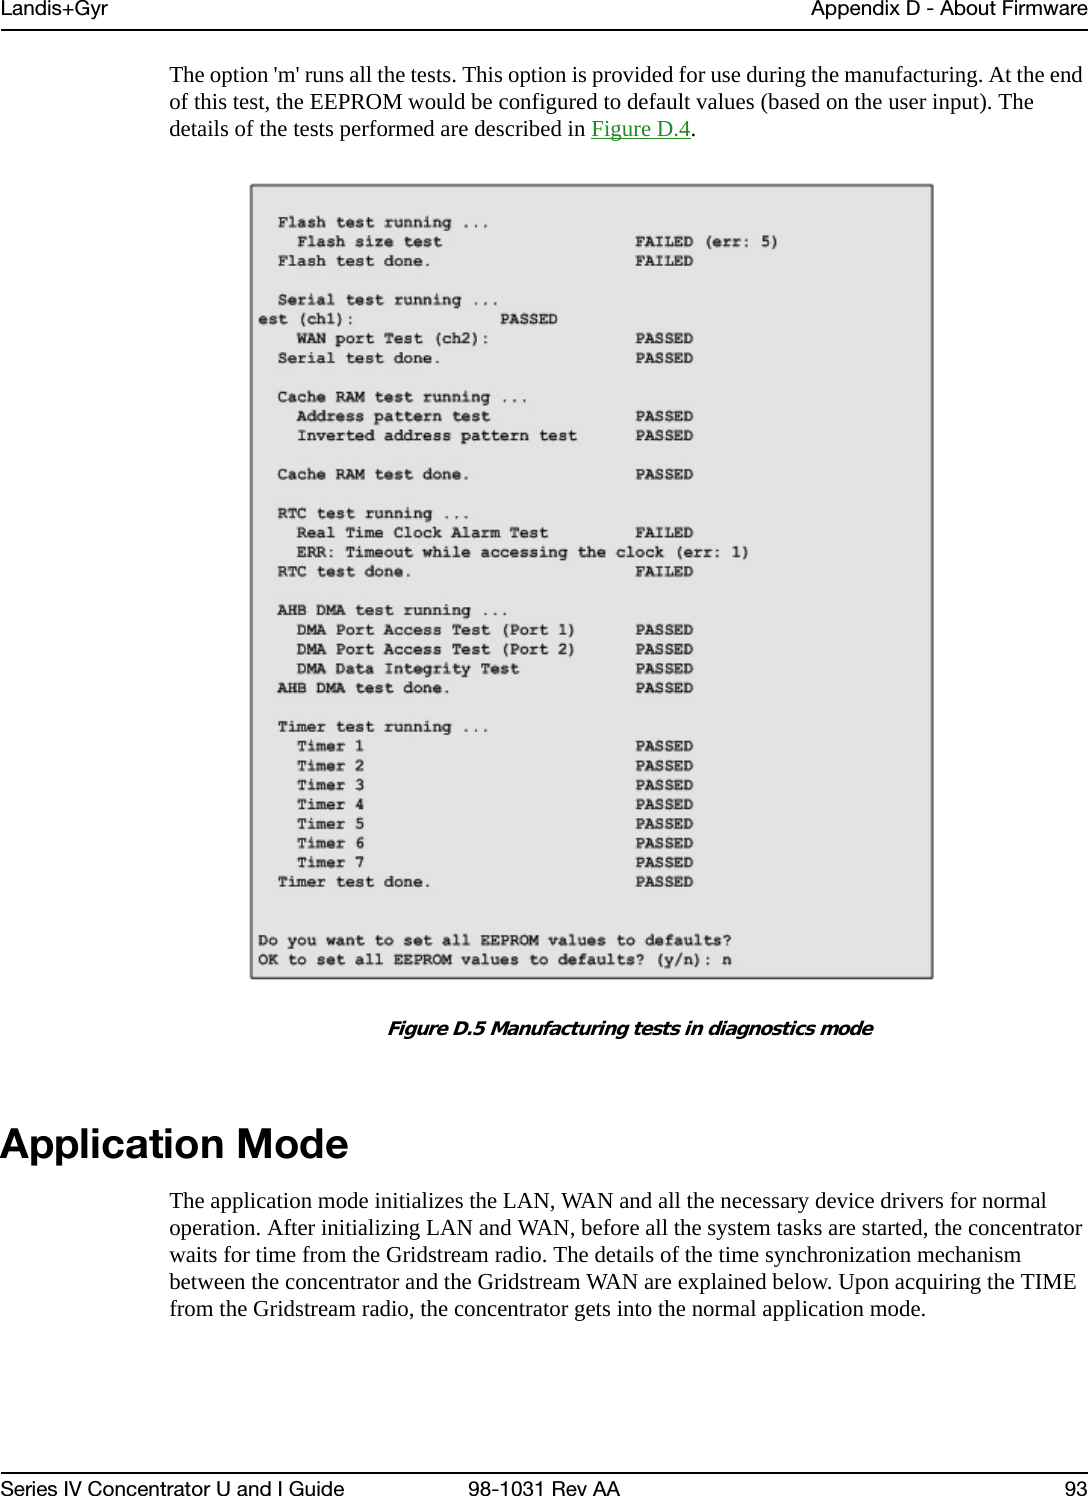 Landis+Gyr Appendix D - About FirmwareSeries IV Concentrator U and I Guide 98-1031 Rev AA 93The option &apos;m&apos; runs all the tests. This option is provided for use during the manufacturing. At the end of this test, the EEPROM would be configured to default values (based on the user input). The details of the tests performed are described in Figure D.4.Figure D.5 Manufacturing tests in diagnostics modeApplication ModeThe application mode initializes the LAN, WAN and all the necessary device drivers for normal operation. After initializing LAN and WAN, before all the system tasks are started, the concentrator waits for time from the Gridstream radio. The details of the time synchronization mechanism between the concentrator and the Gridstream WAN are explained below. Upon acquiring the TIME from the Gridstream radio, the concentrator gets into the normal application mode.